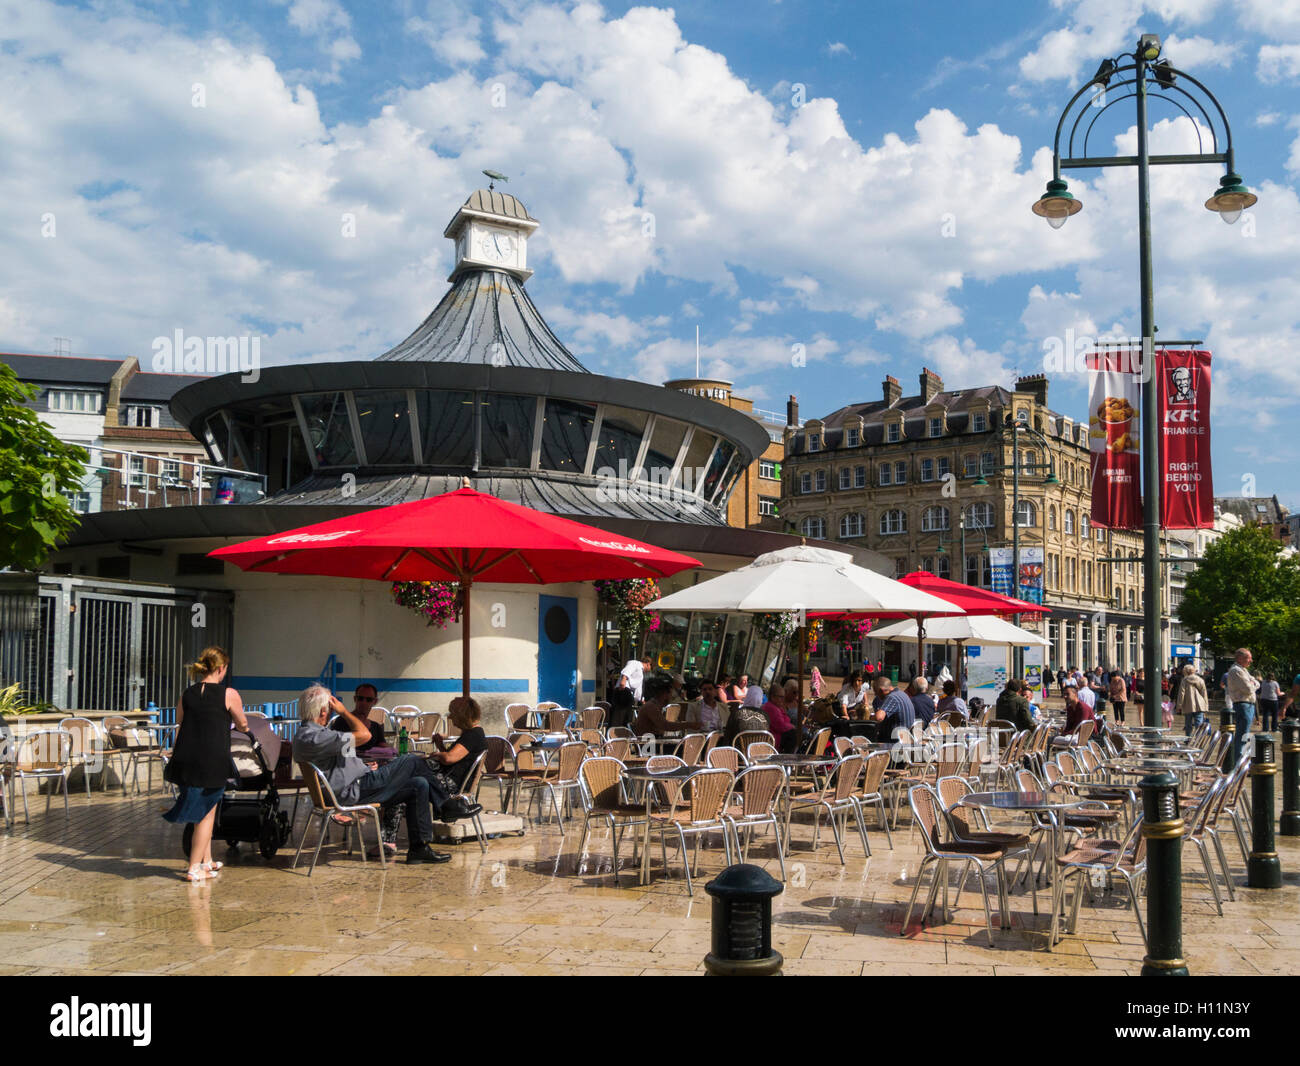 Obscura Cafe in pedestrianised The Square Bournemouth Dorset England UK Stock Photo